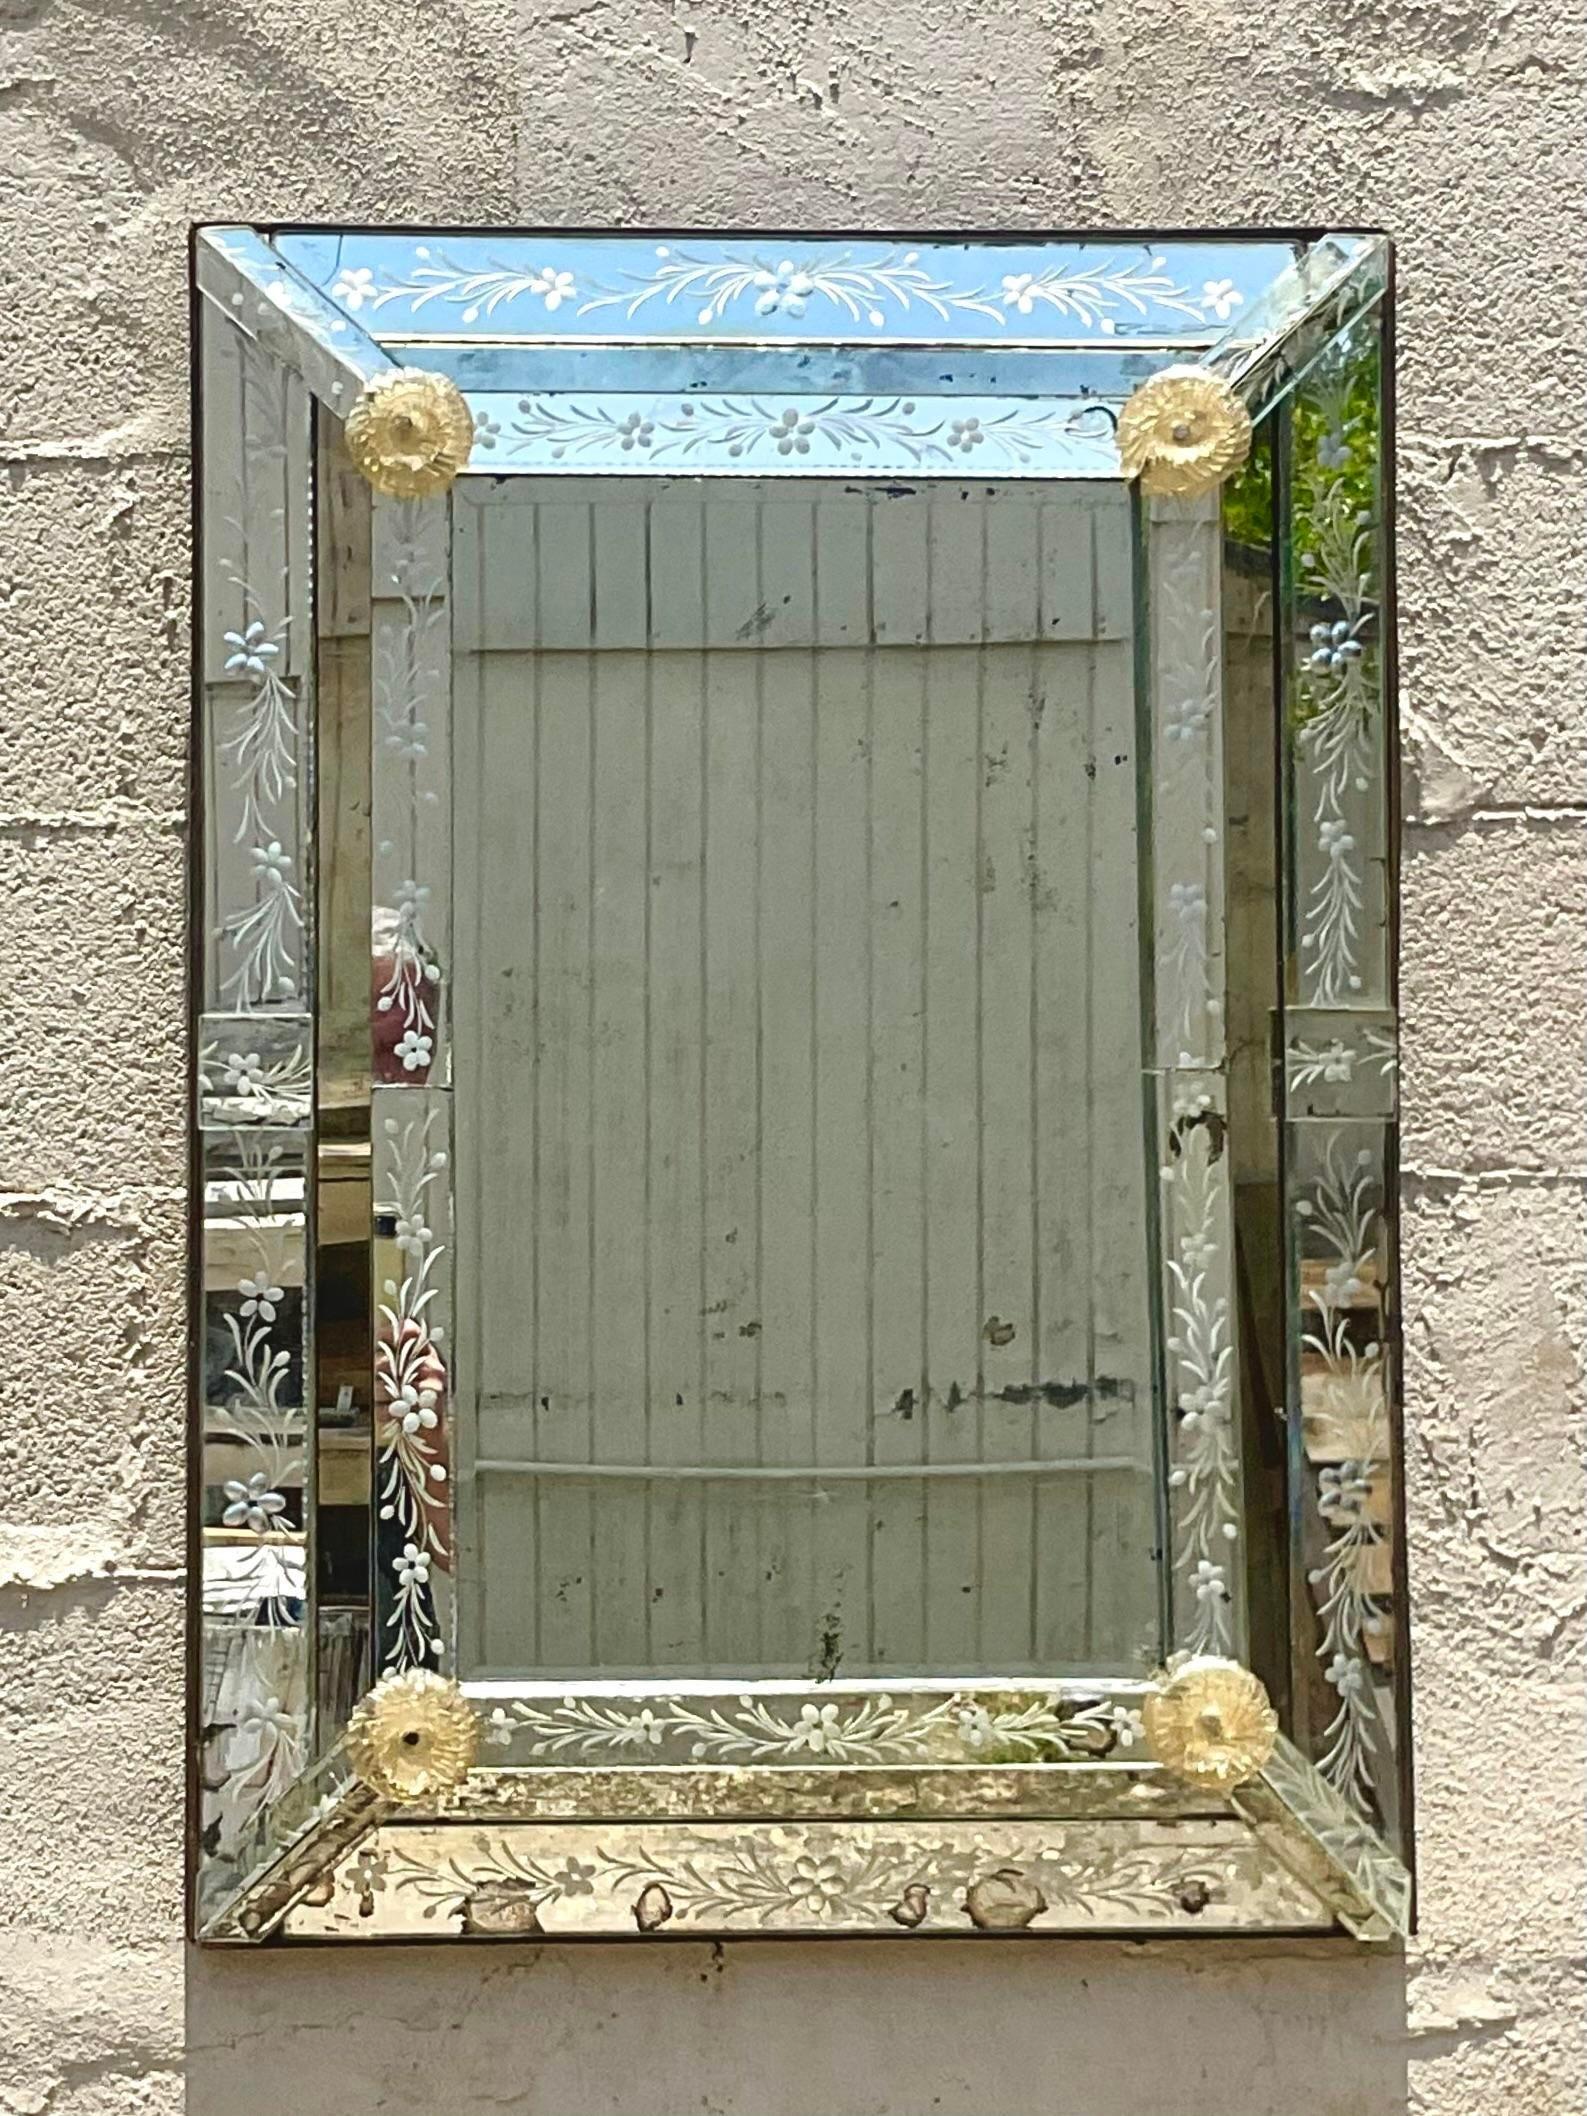 A fabulous vintage Boho wall mirror. A chic antique etched glass mirror with beautiful etching detail. Hand blow rosettes in a pale yellow. This mirror shows all its patina with missing foil and cracks to the glass. But it adds to the romantic